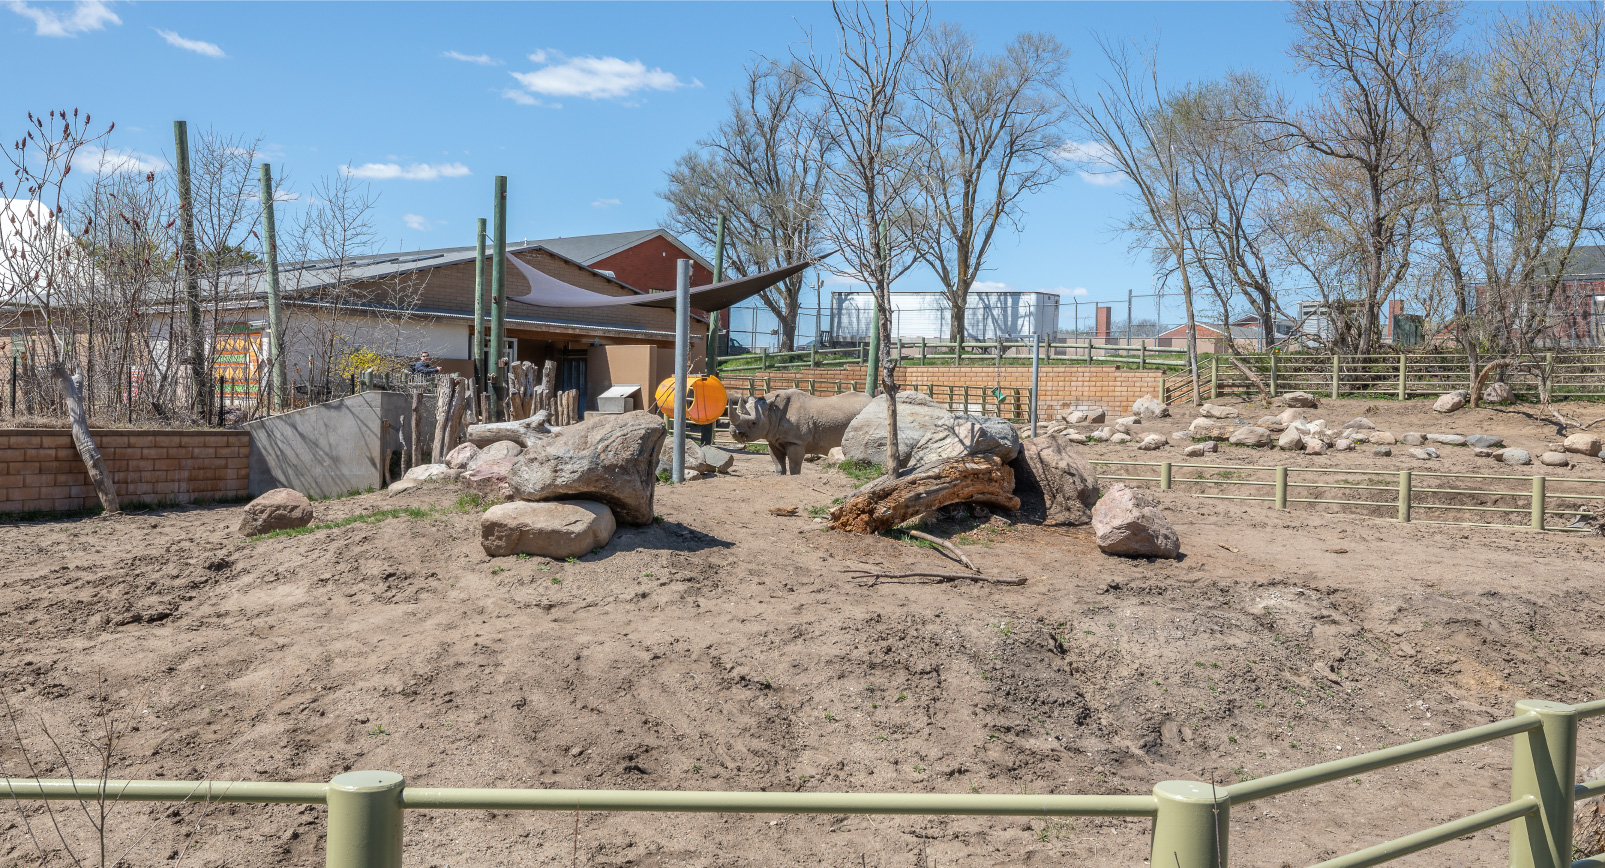 Rhino in enclosure landscaping at Blank Park Zoo in Des Moines, Iowa by Perficut